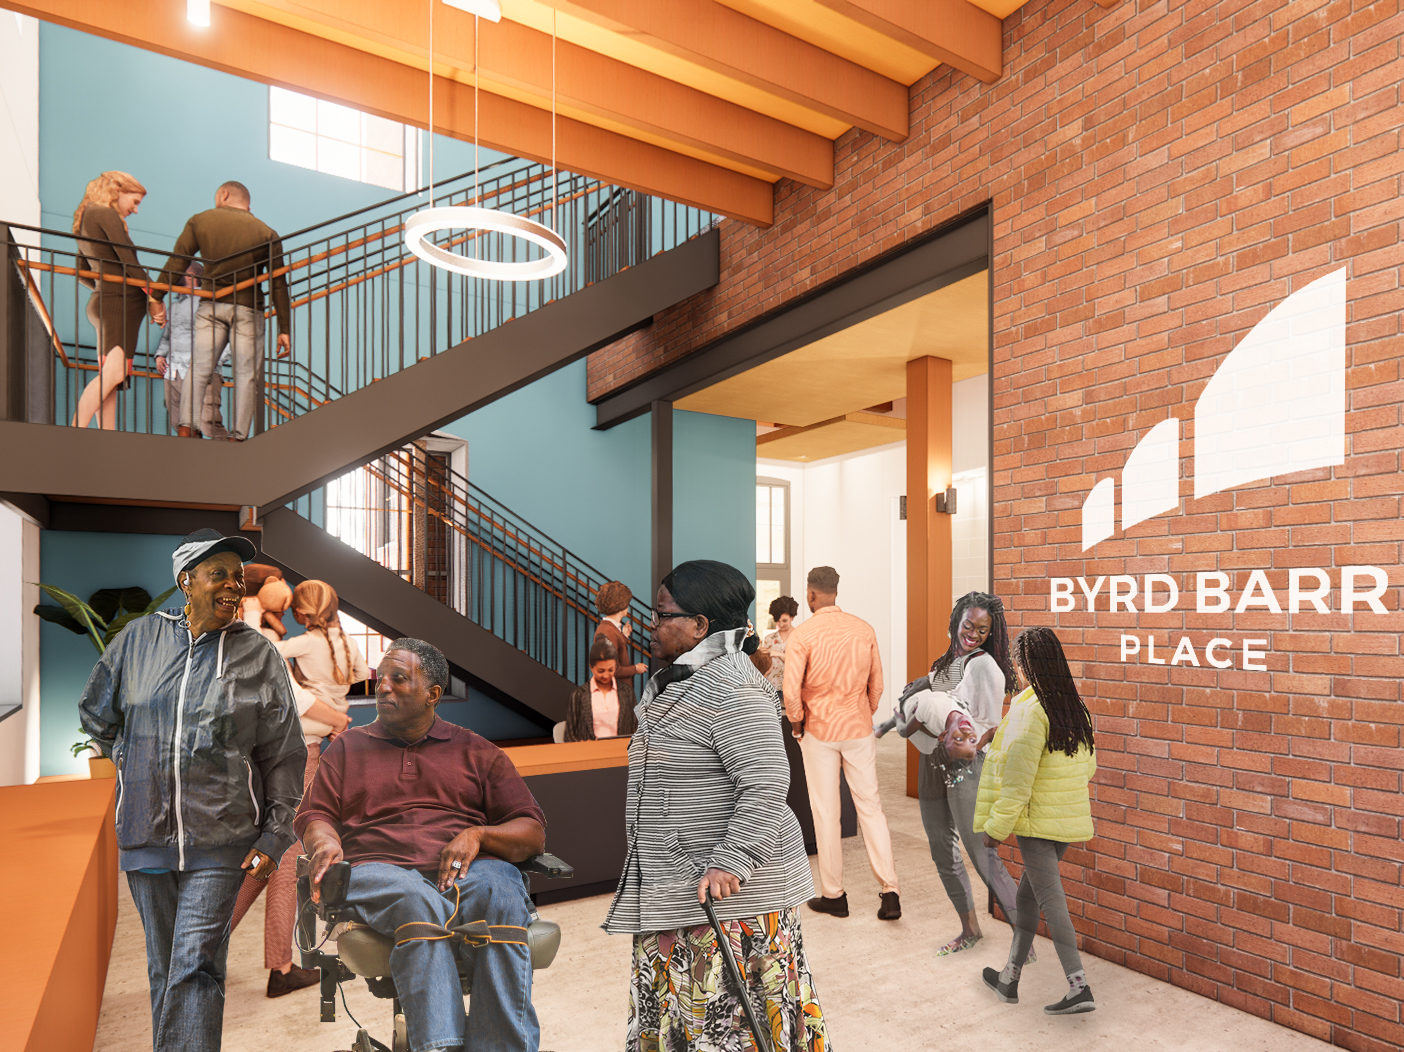 A rendering if the new Byrd Barr Place lobby, with people gathered